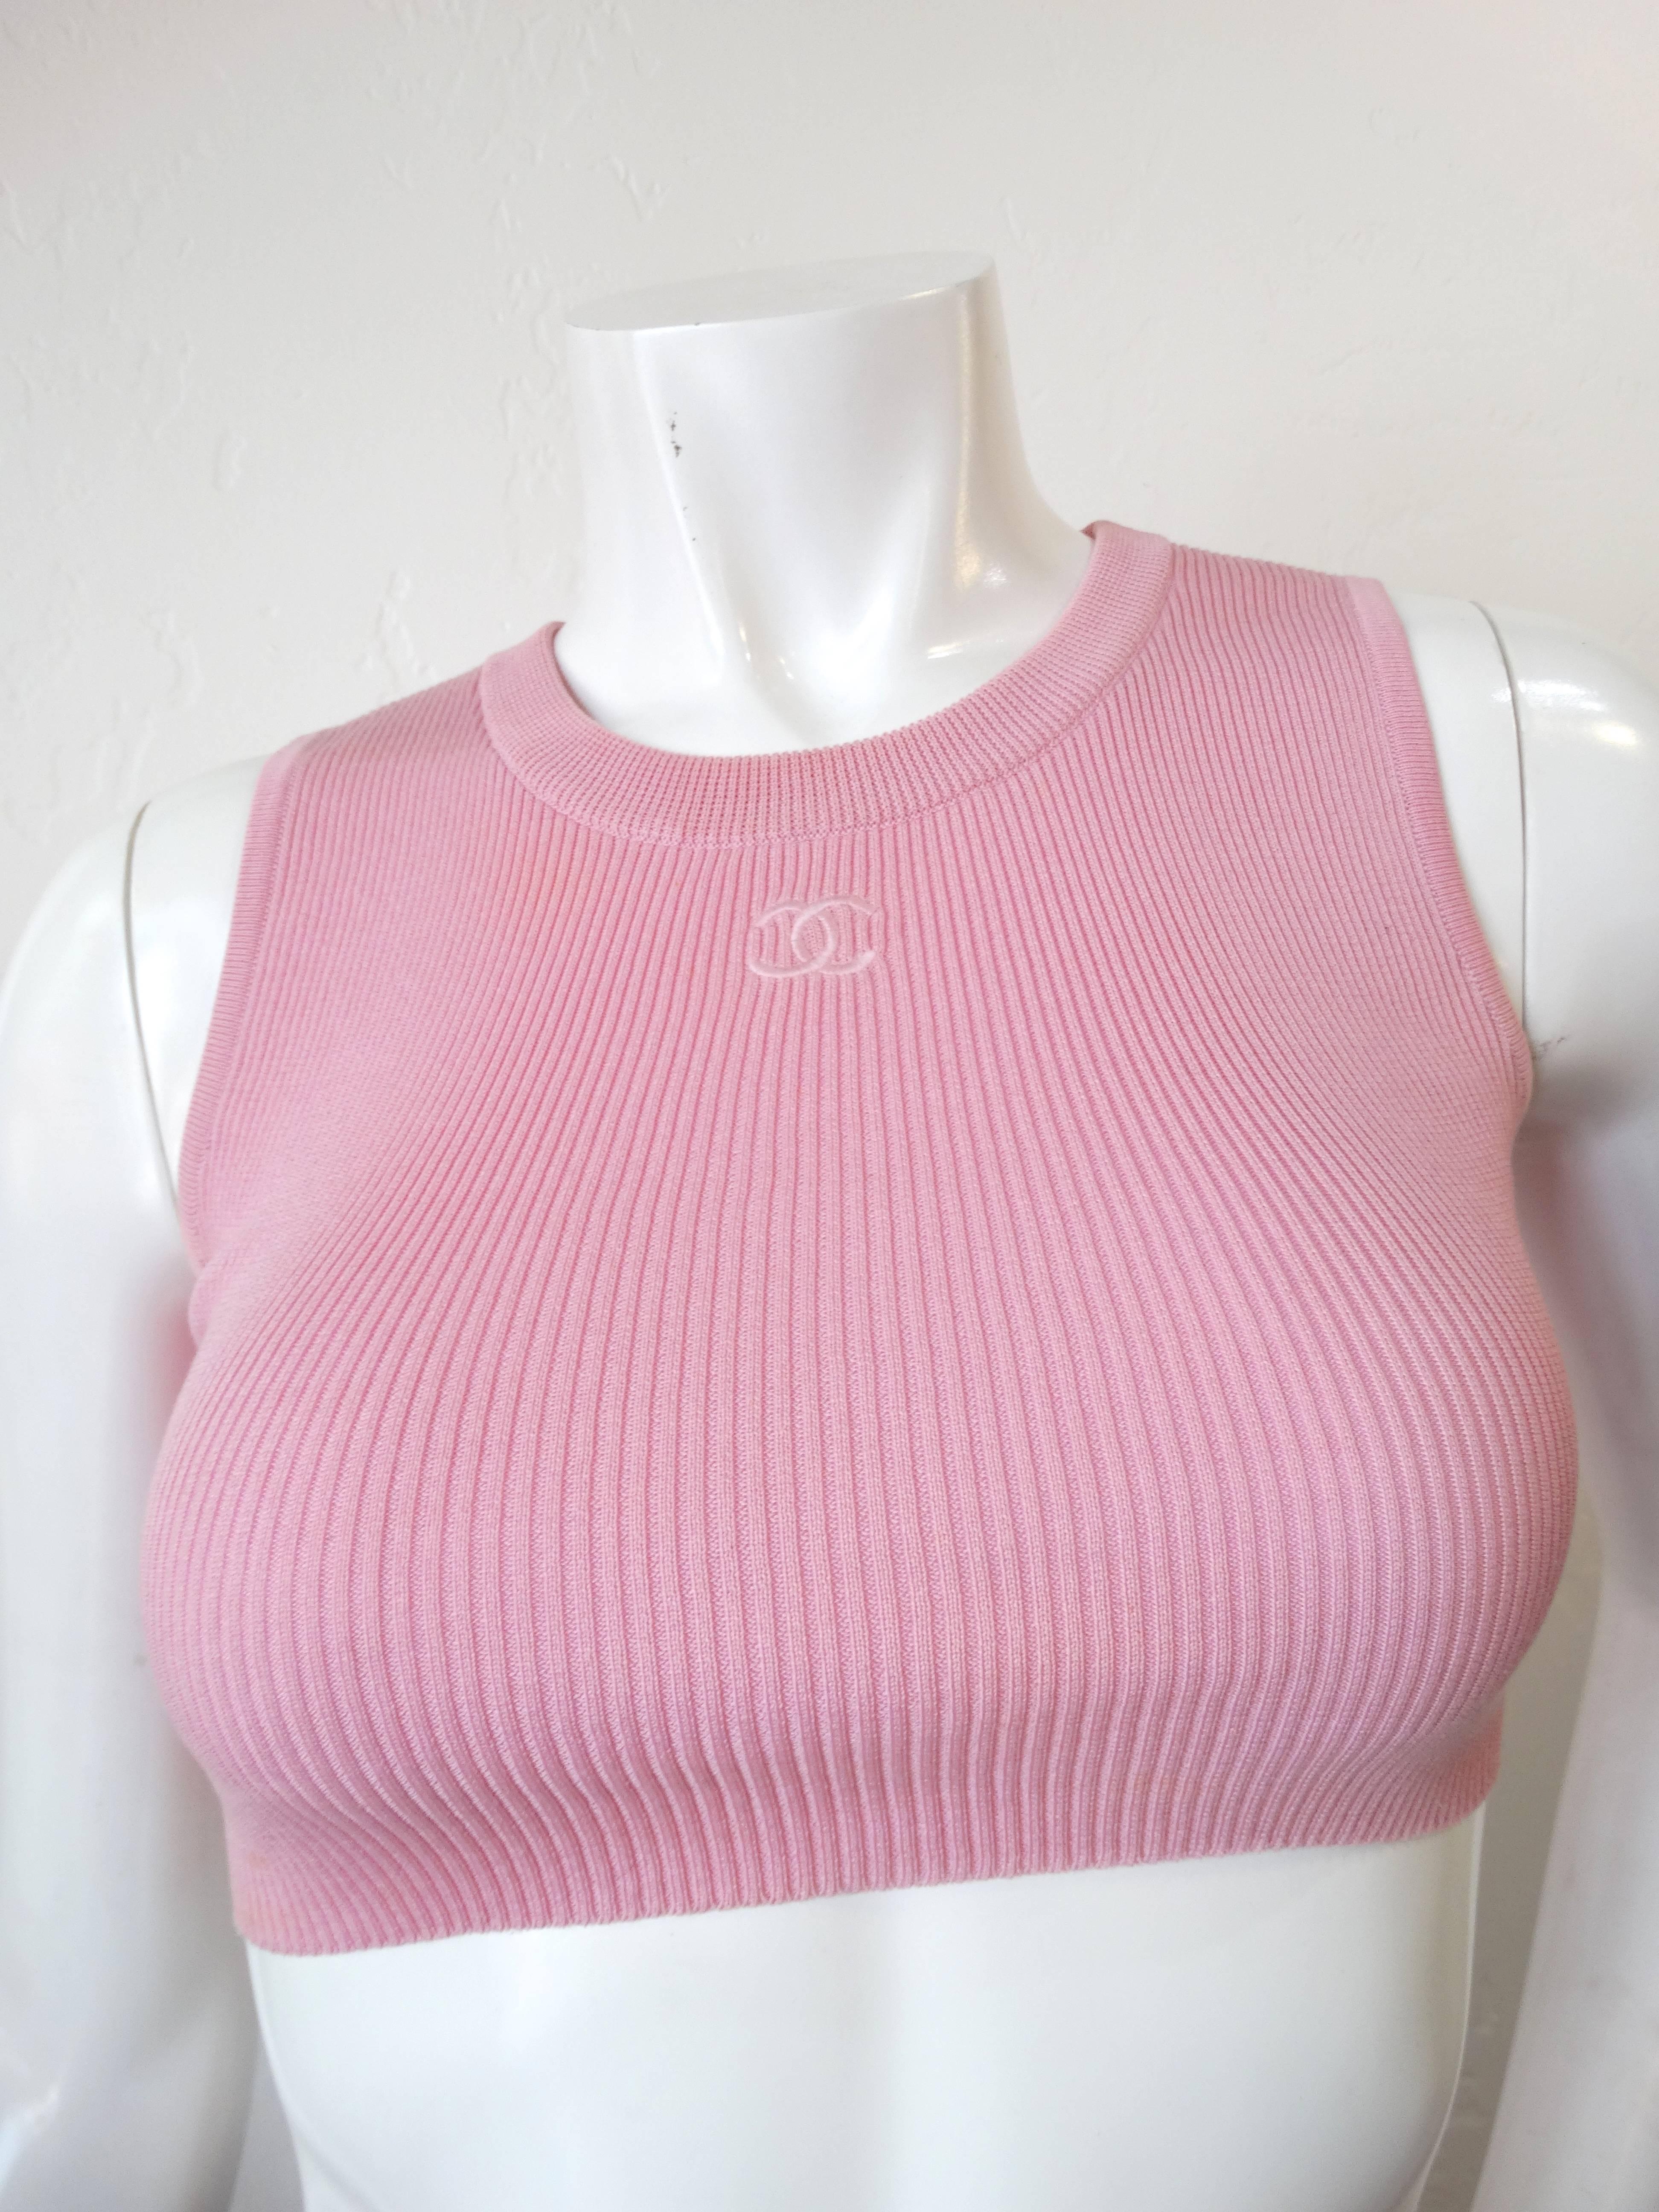 Incredible Chanel crop top made in 1995! Sleeveless with super cropped fit. Stretchy baby pink cotton knit fabric. Signature Chanel logo embroidered at the neckline. Marked a Size 36- fits about an XS. 

Some light discoloration along the sides,